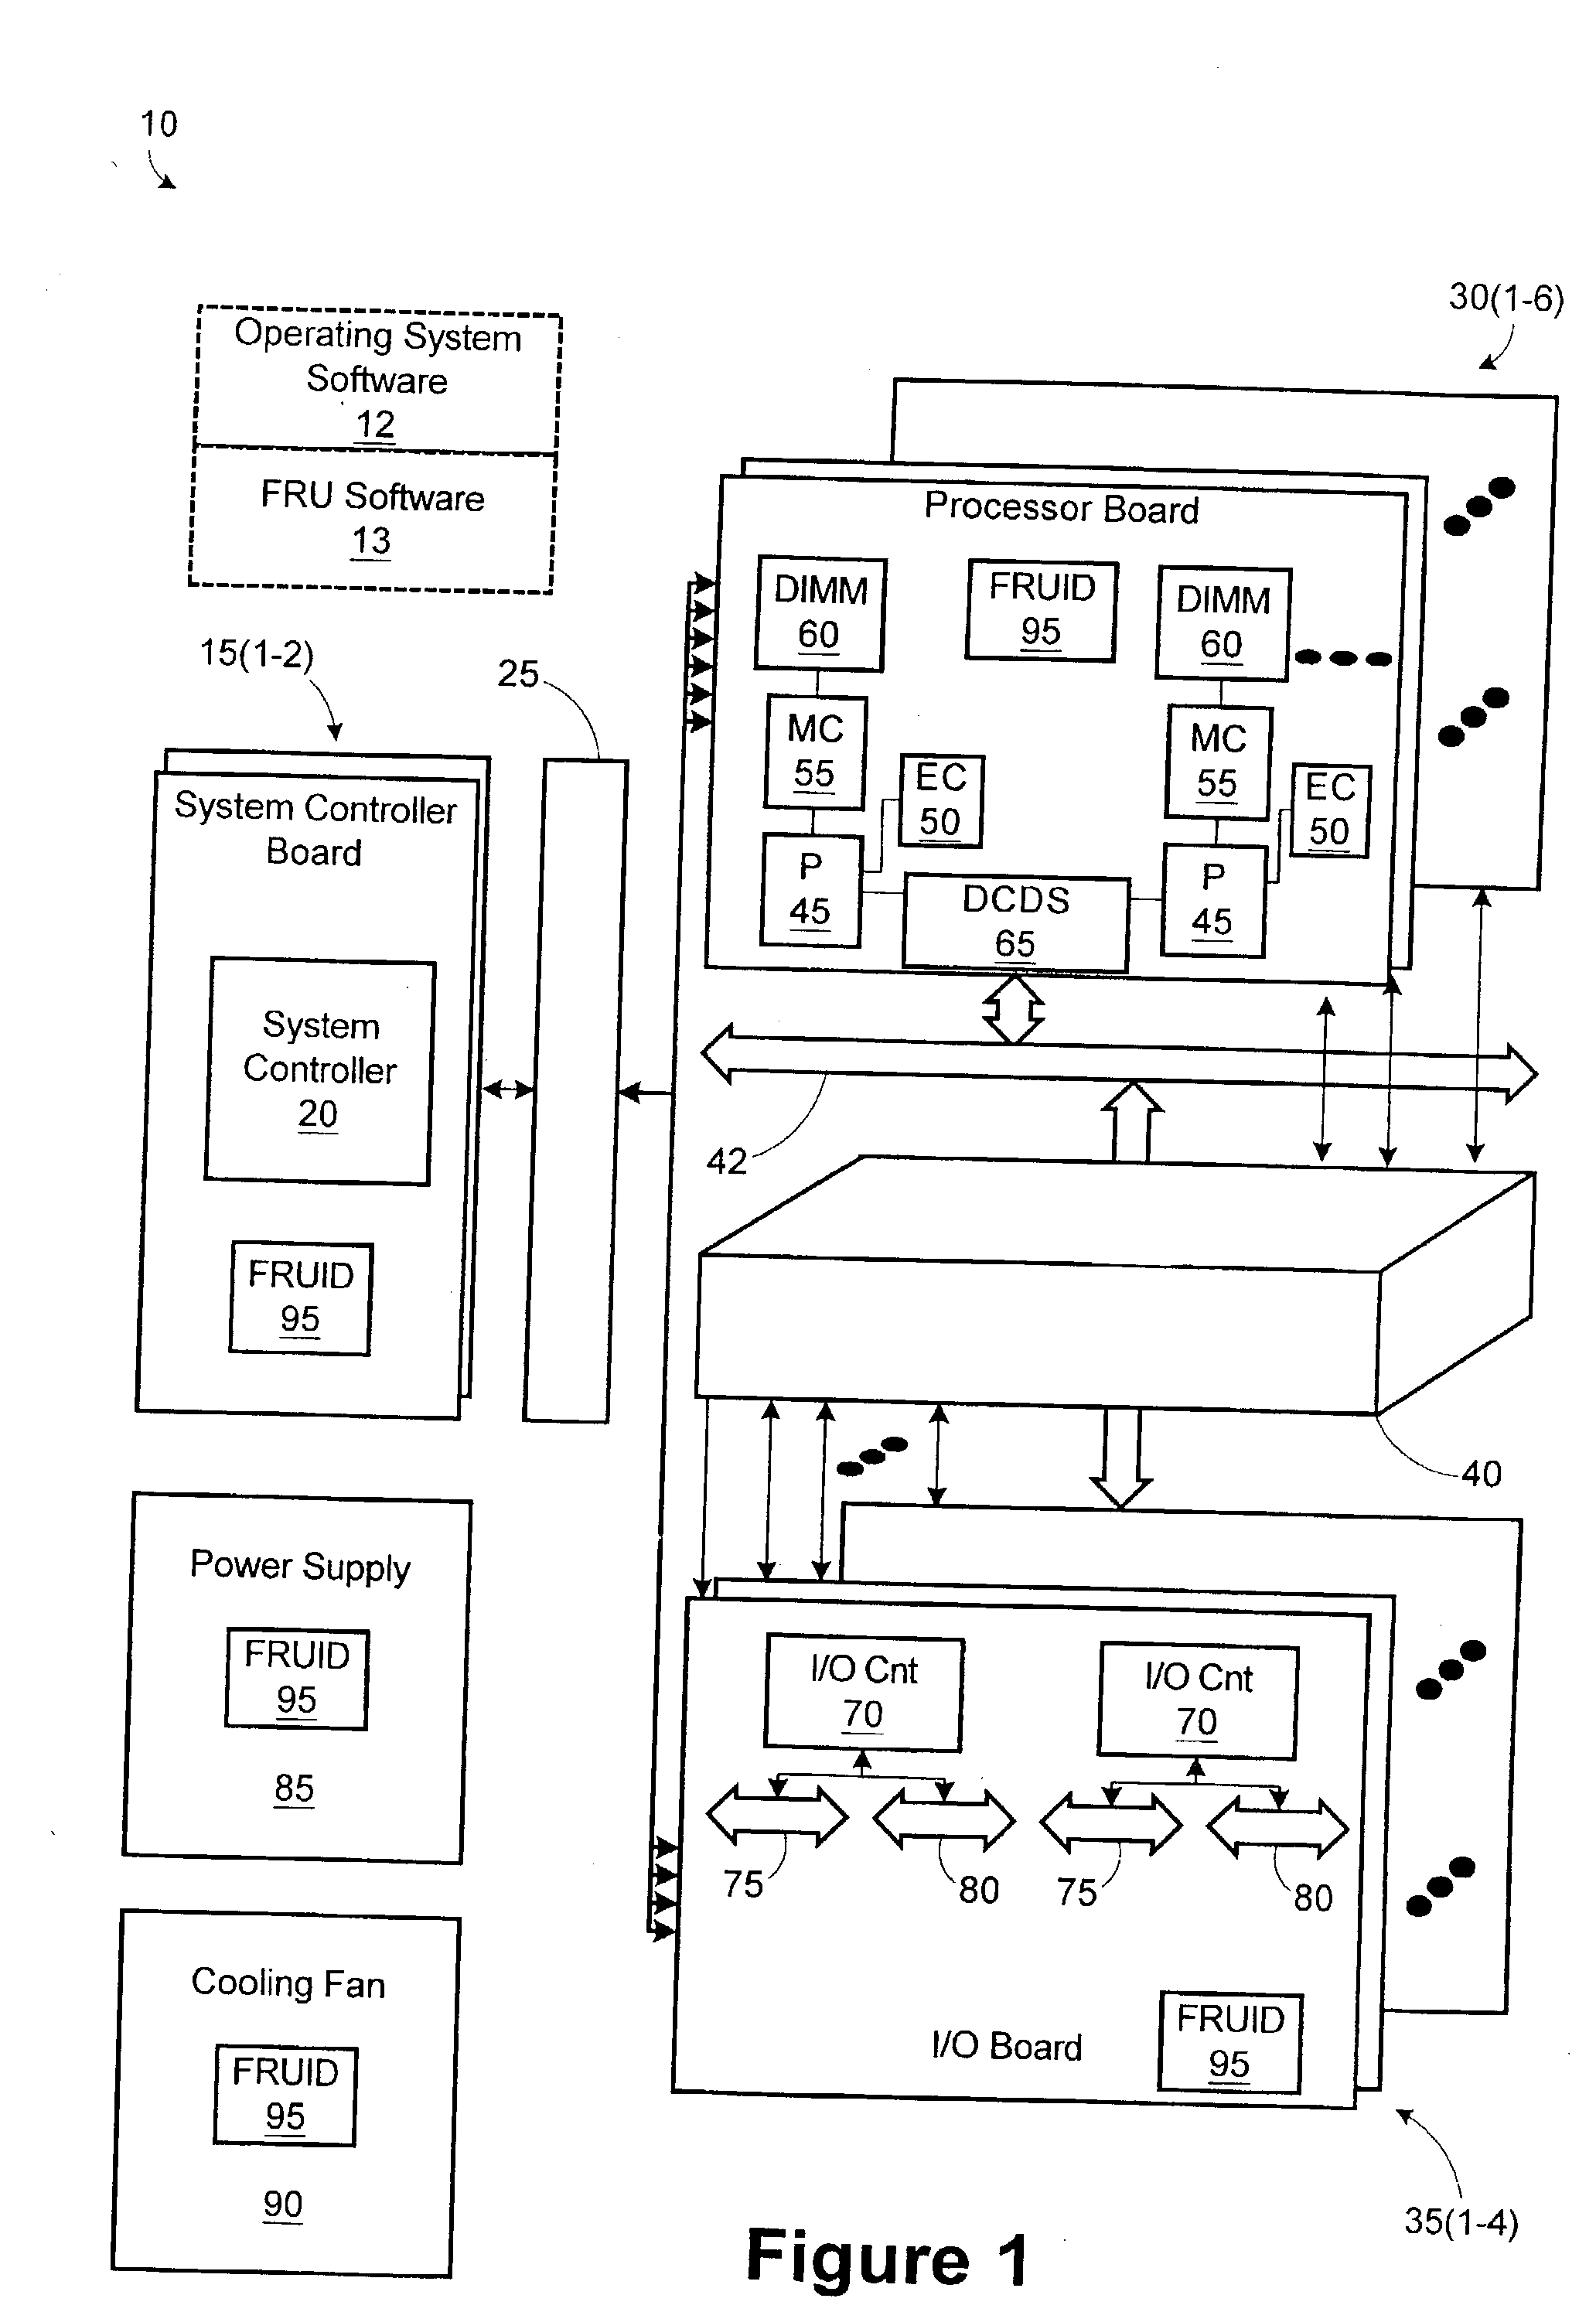 Method and system for storing field replaceable unit dynamic information using tagged data elements